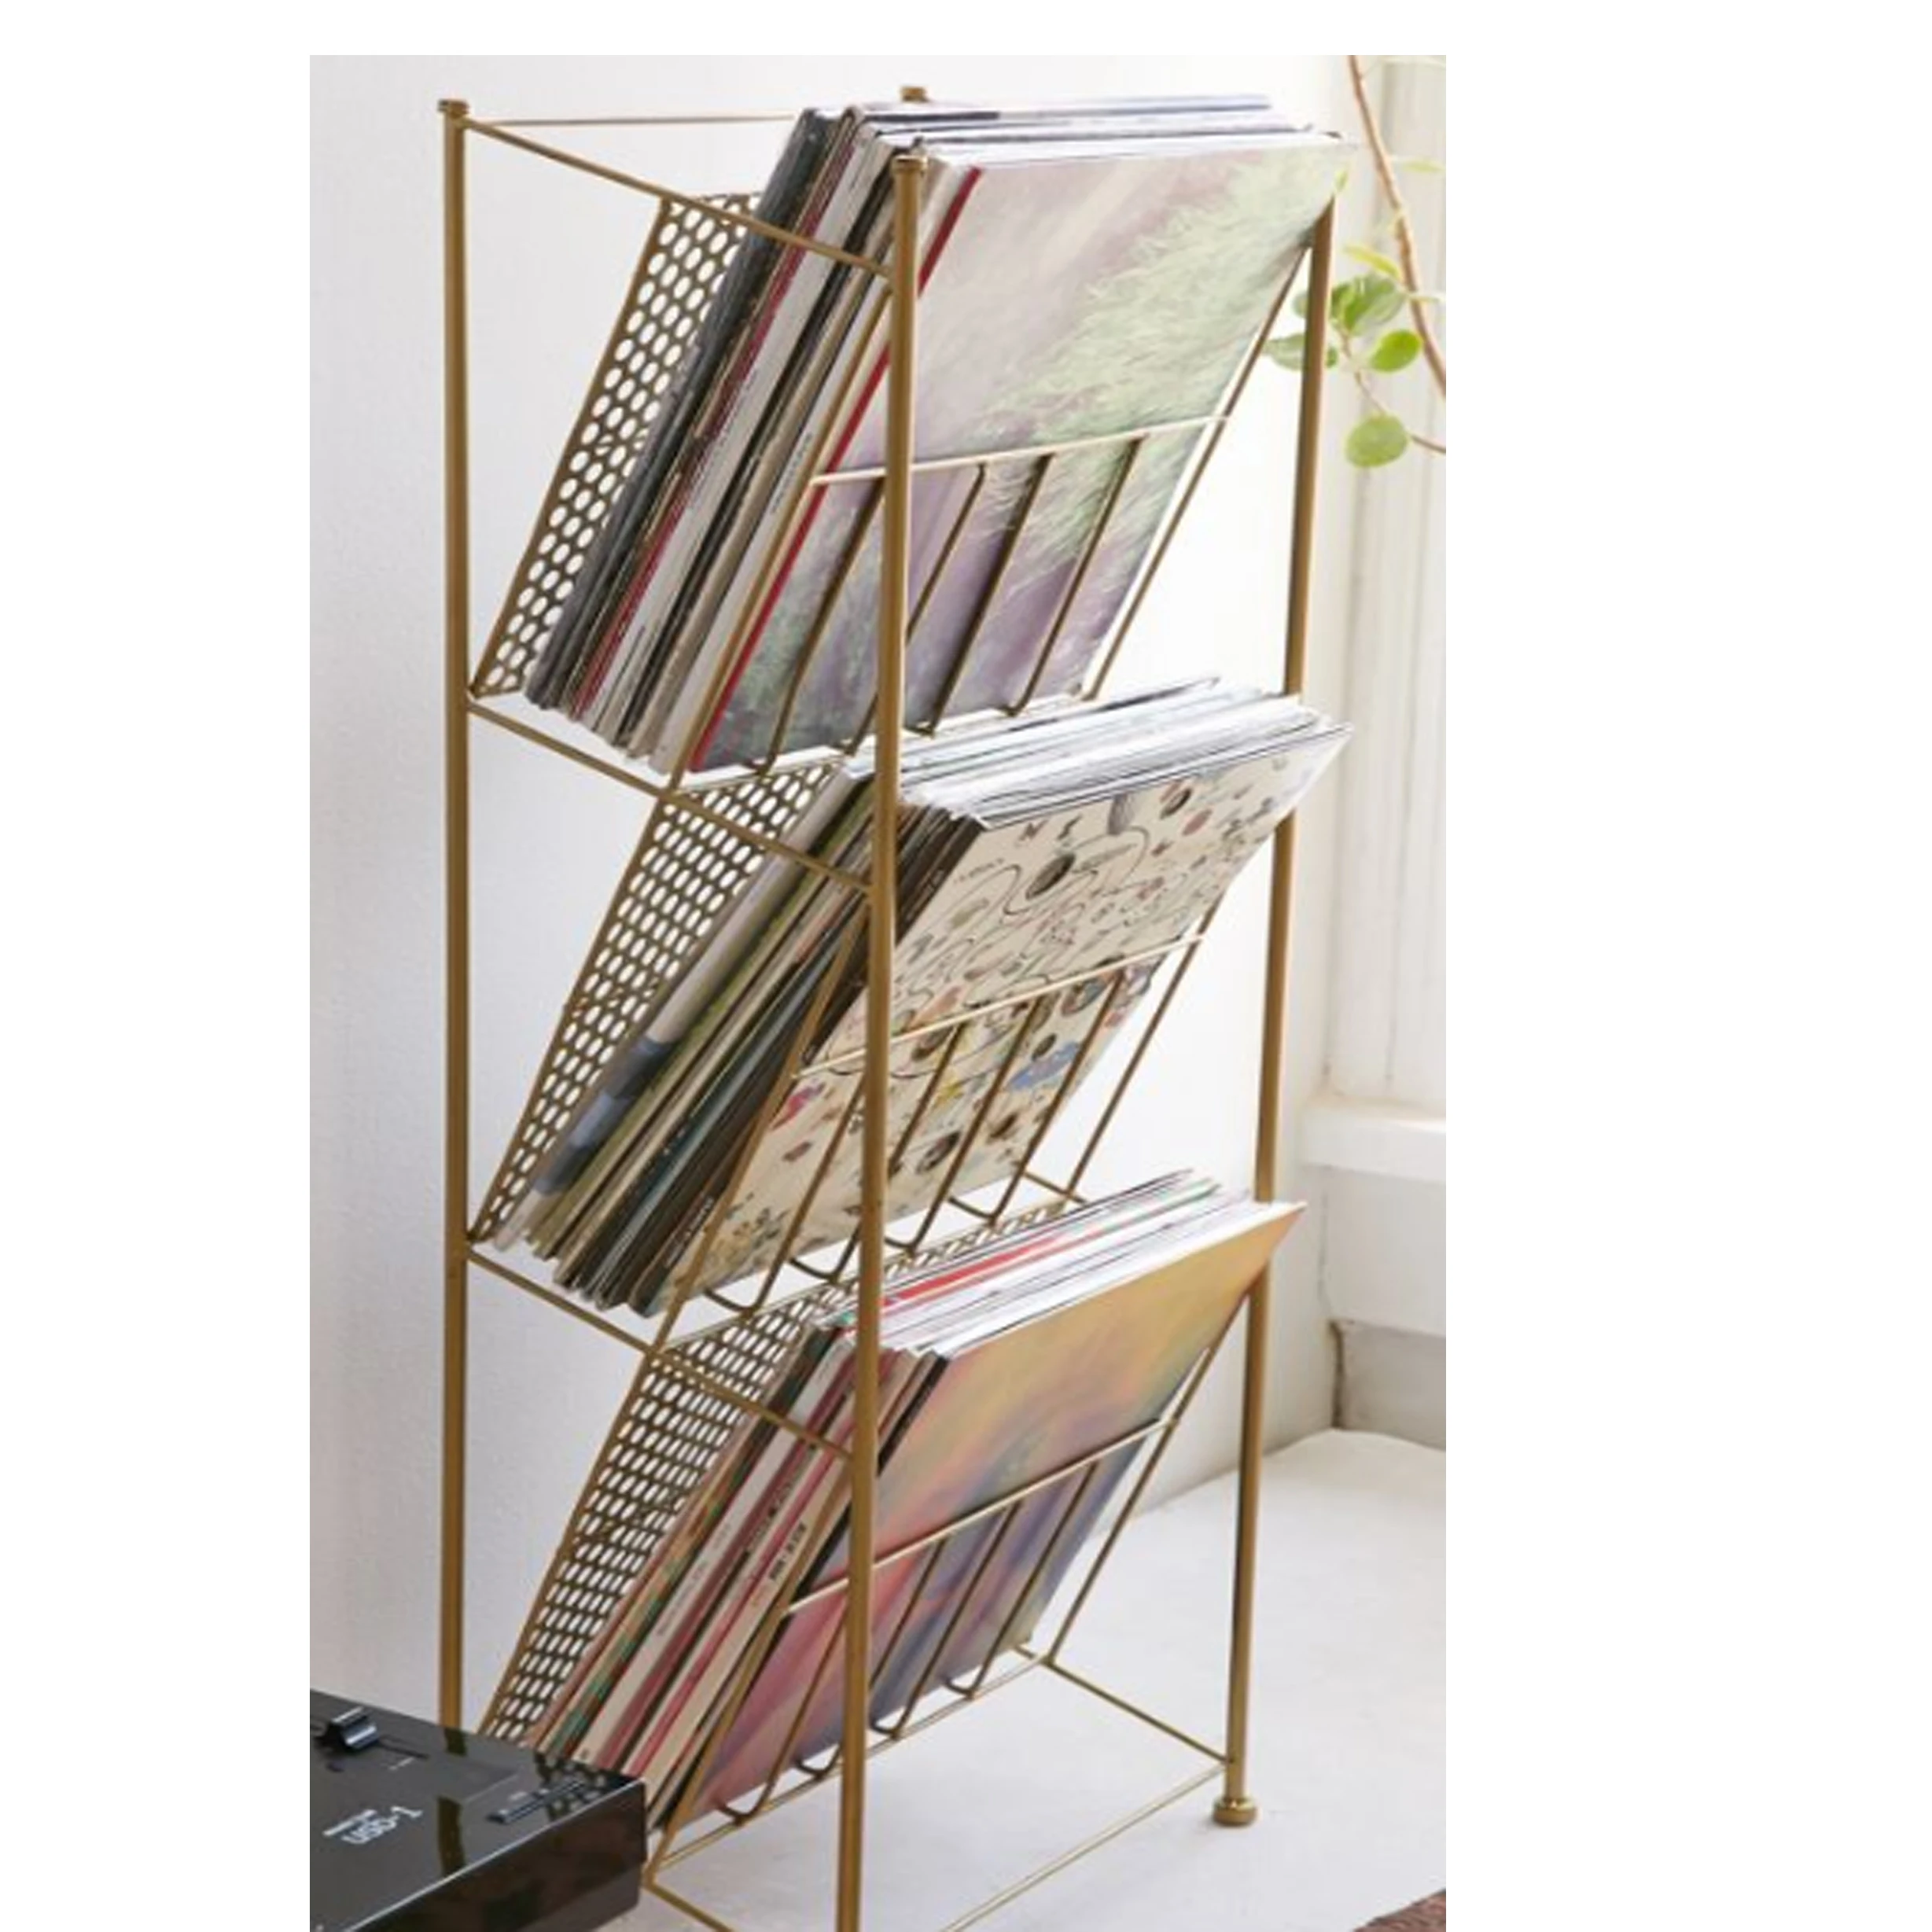 Ilyapa 2-Tier Gold Metal Record Player Stand with 14 Slot Vinyl